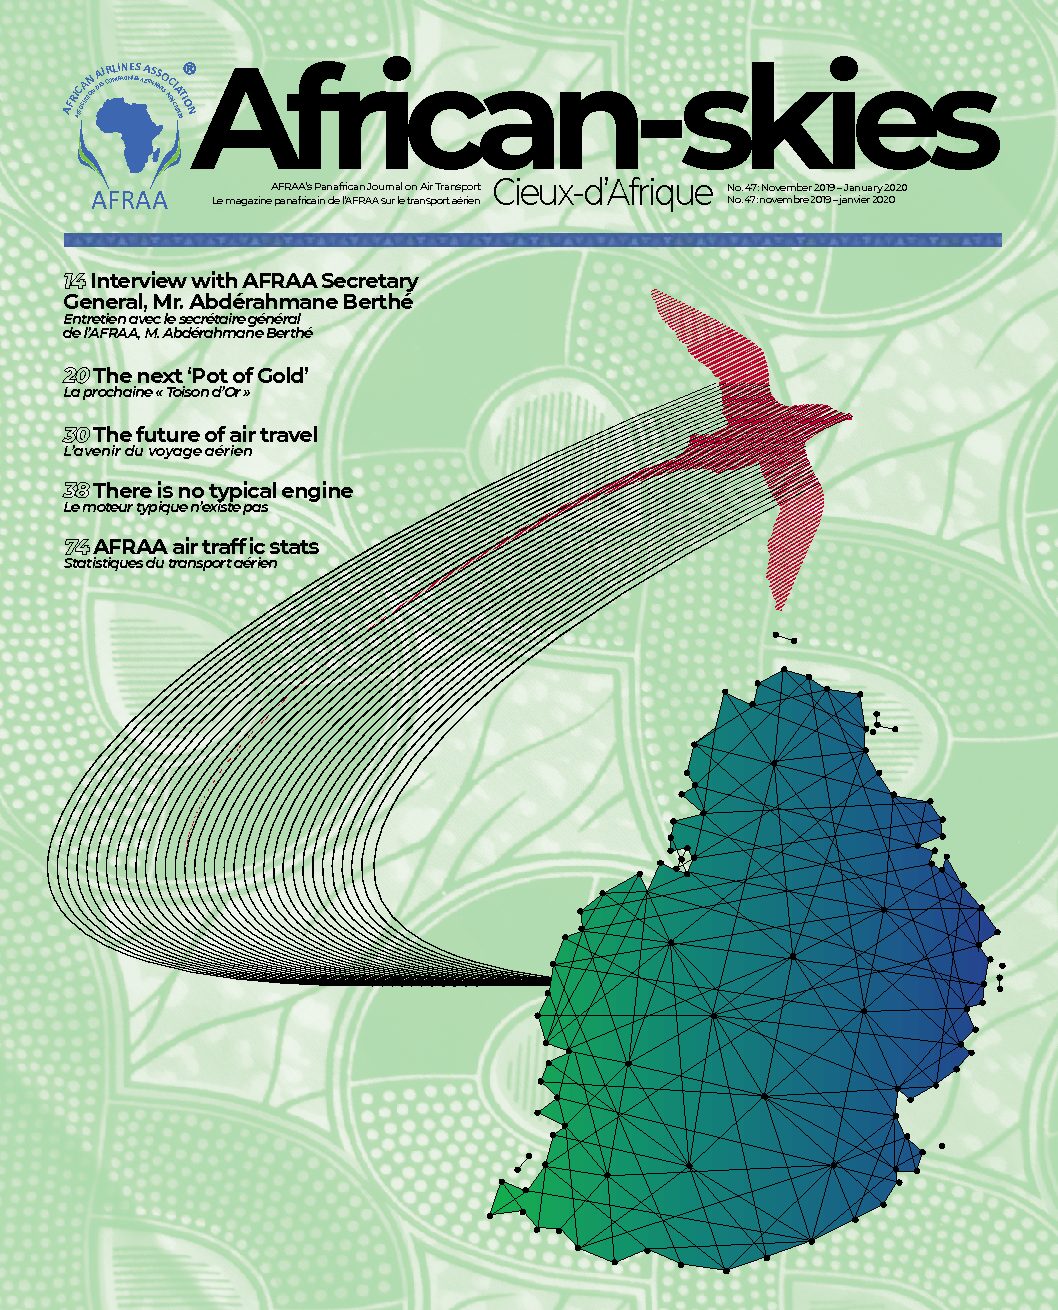 African-Skies Issue 47